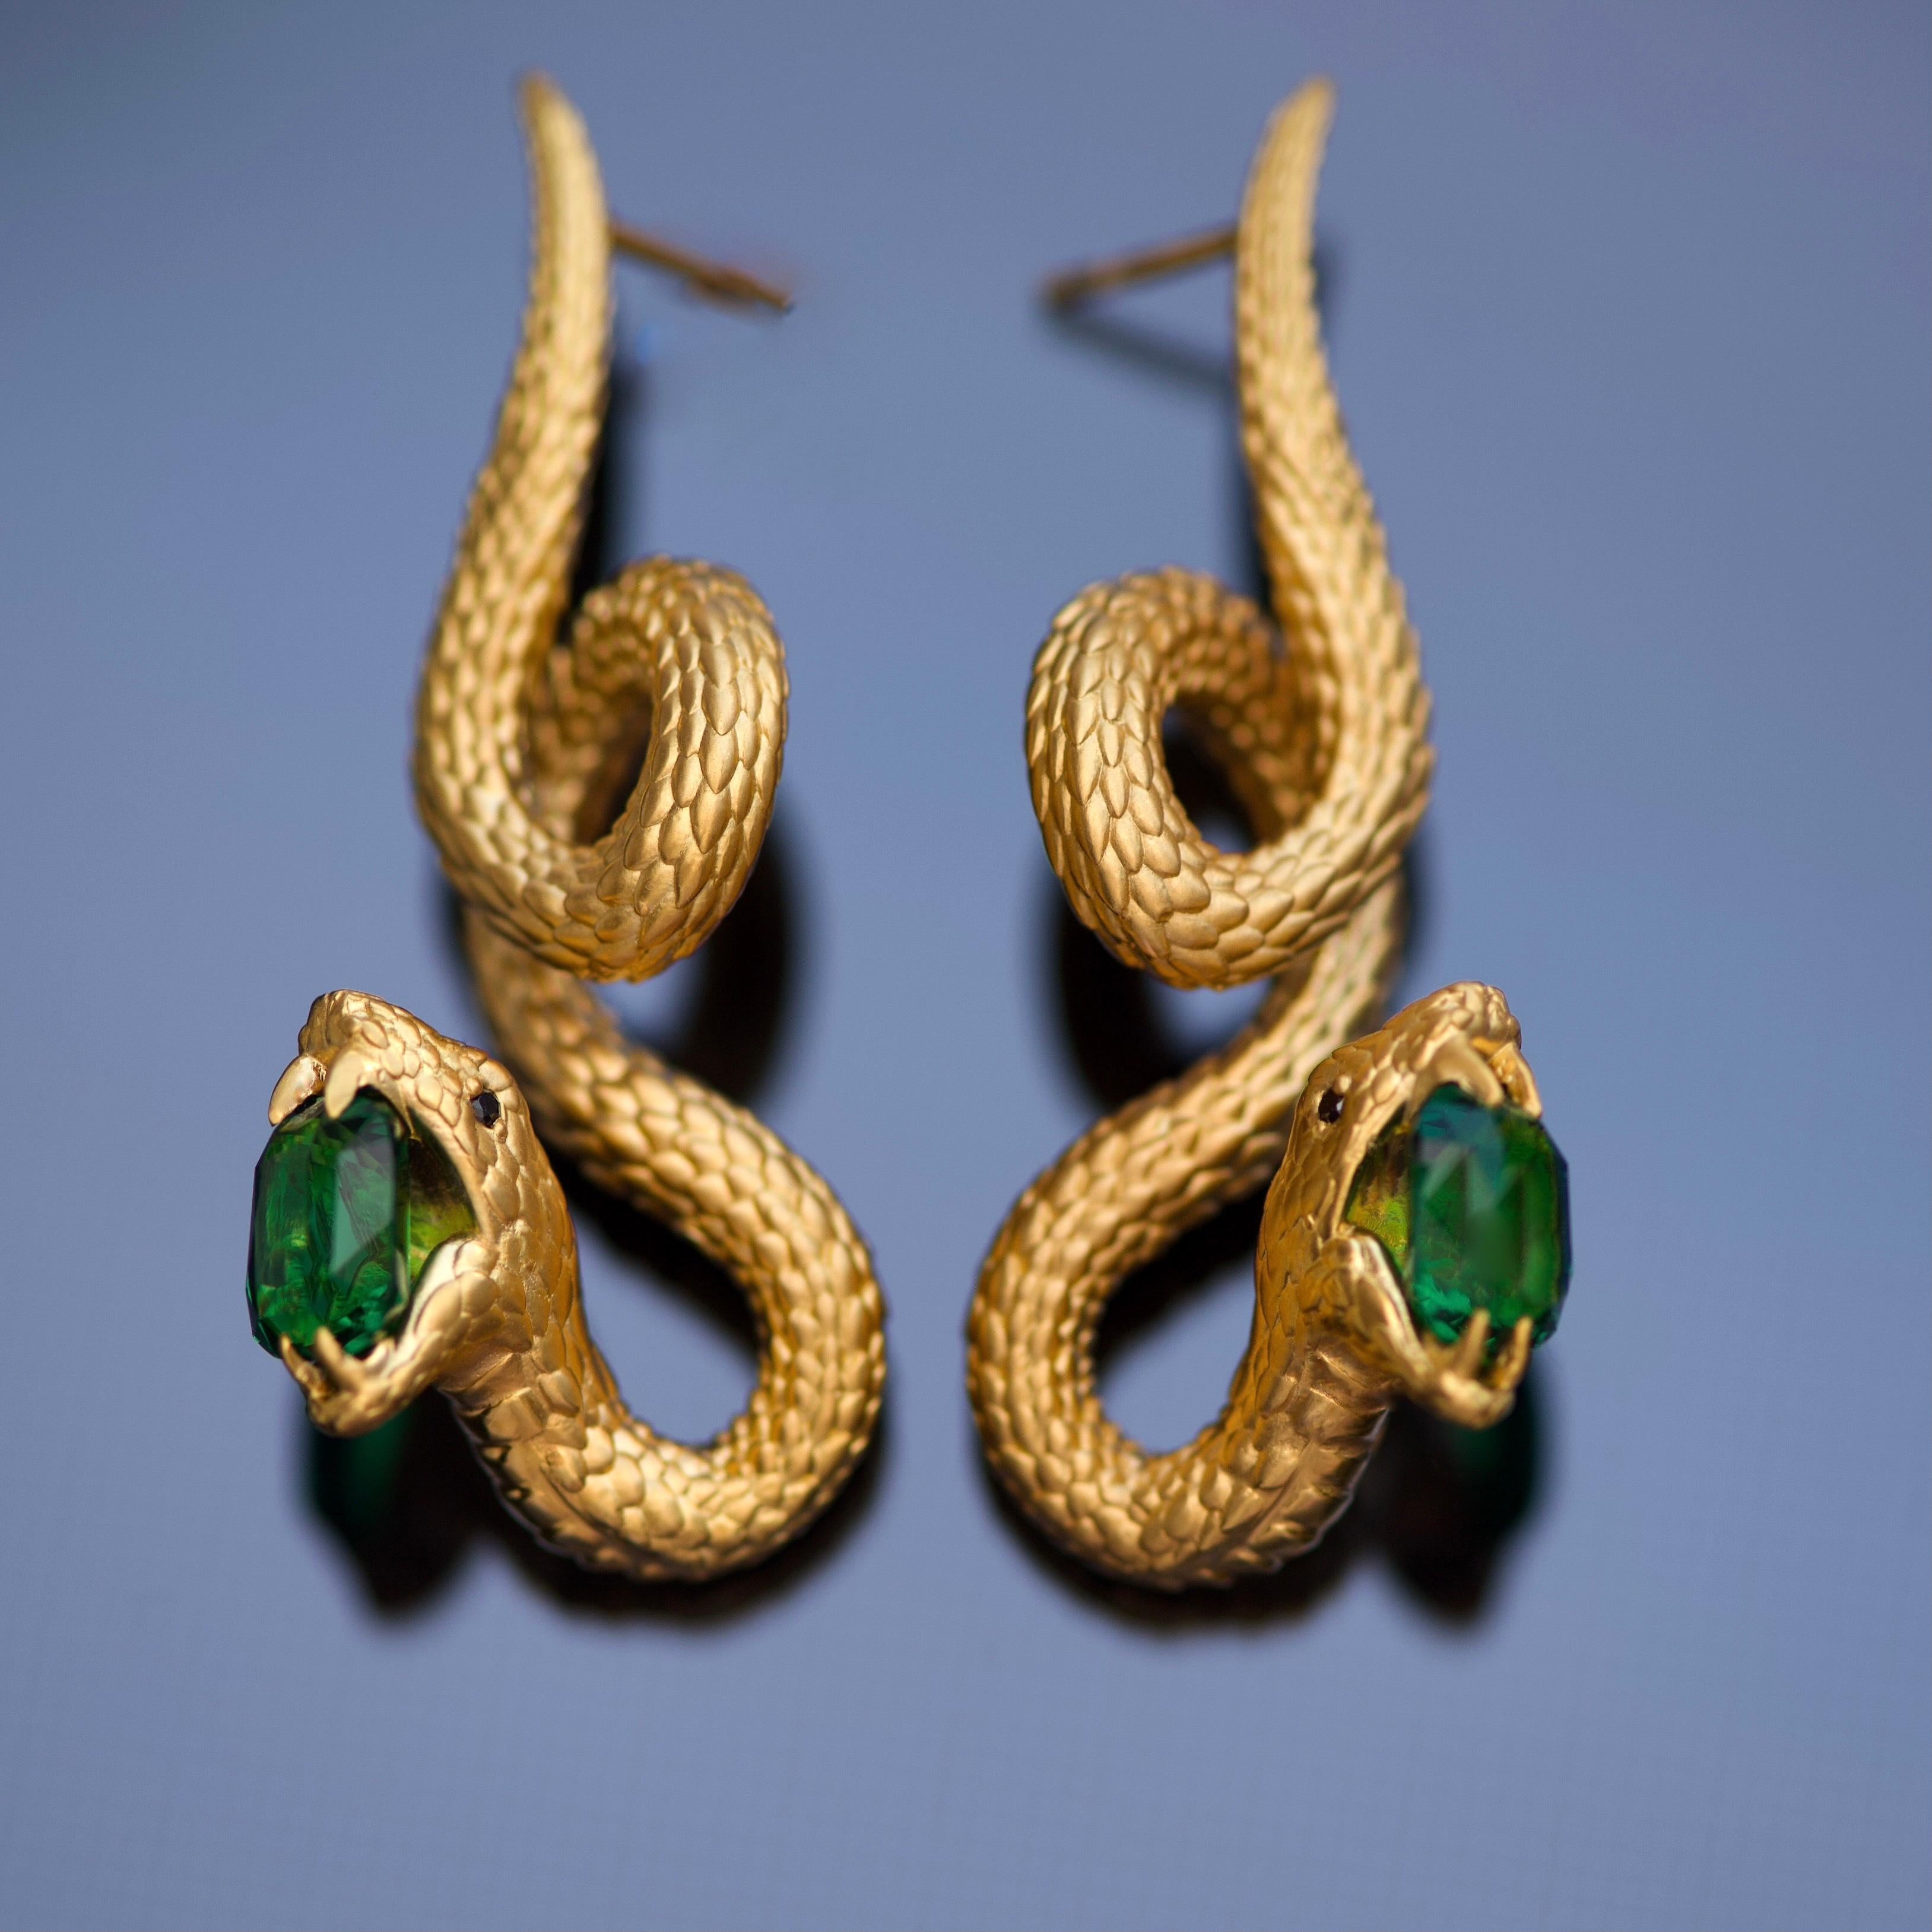 GOLDEN SERPENT COLLECTION by D&A 
The most iconic creation features the power of the Golden Serpent – symbolizing transformation rebirth, creativity, fertility, and hope for a better tomorrow. This signature design interprets the serpent’s skin